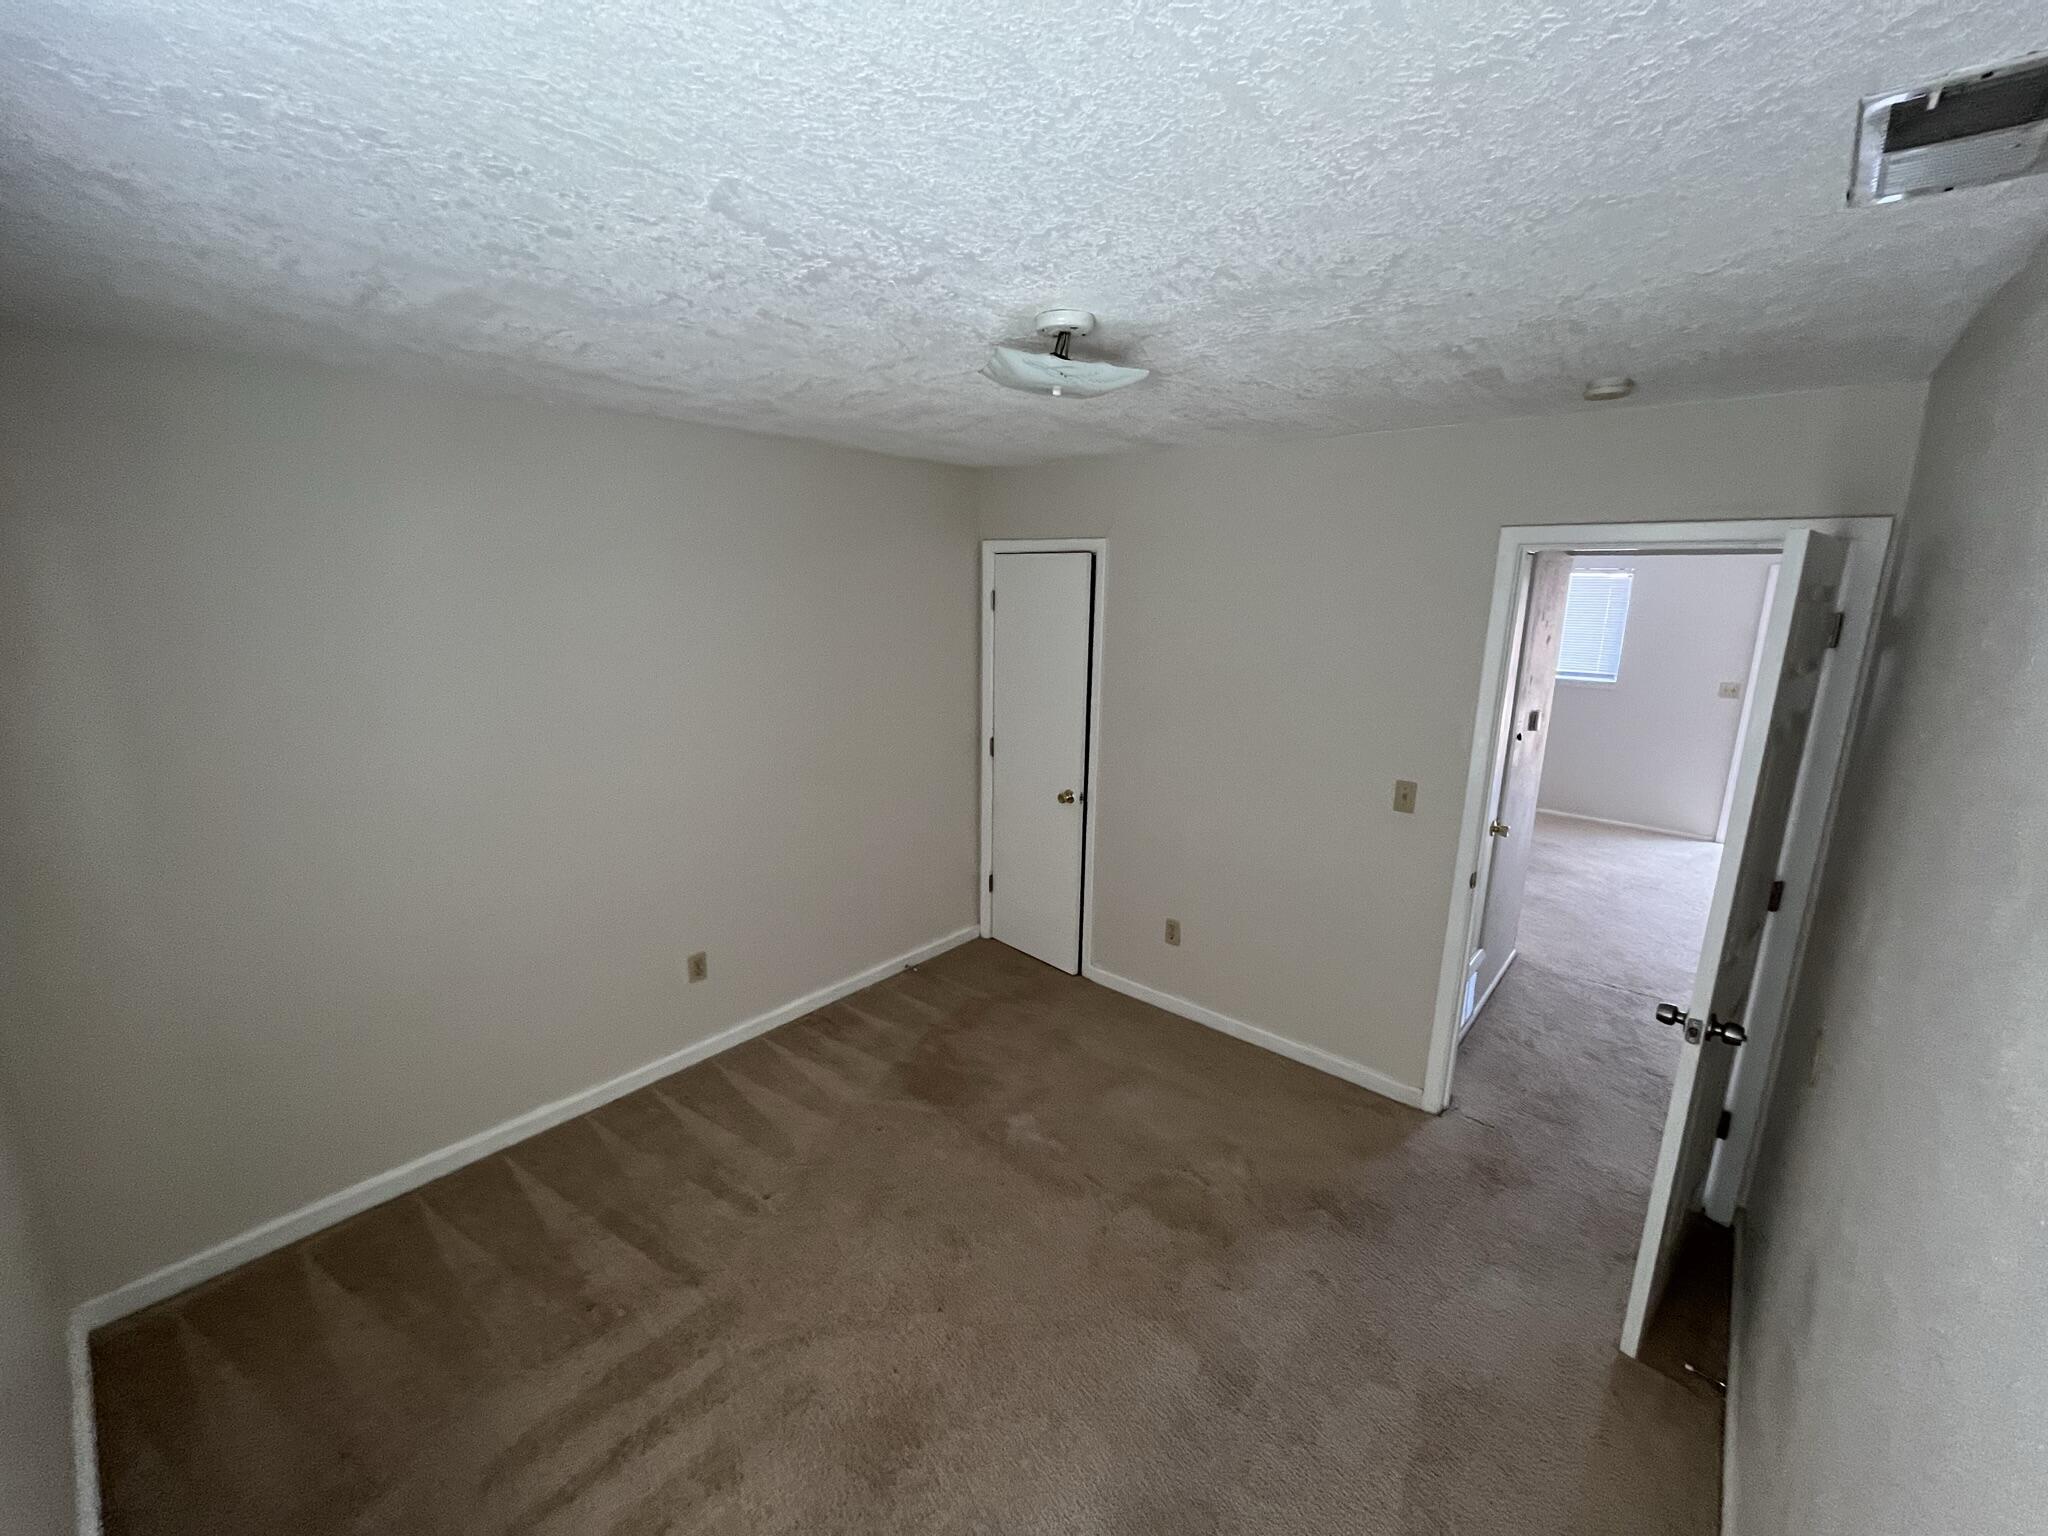 620 Chama Street SE, Albuquerque, New Mexico 87108, 2 Bedrooms Bedrooms, ,1 BathroomBathrooms,Residential Income,For Sale,620 Chama Street SE,1059601